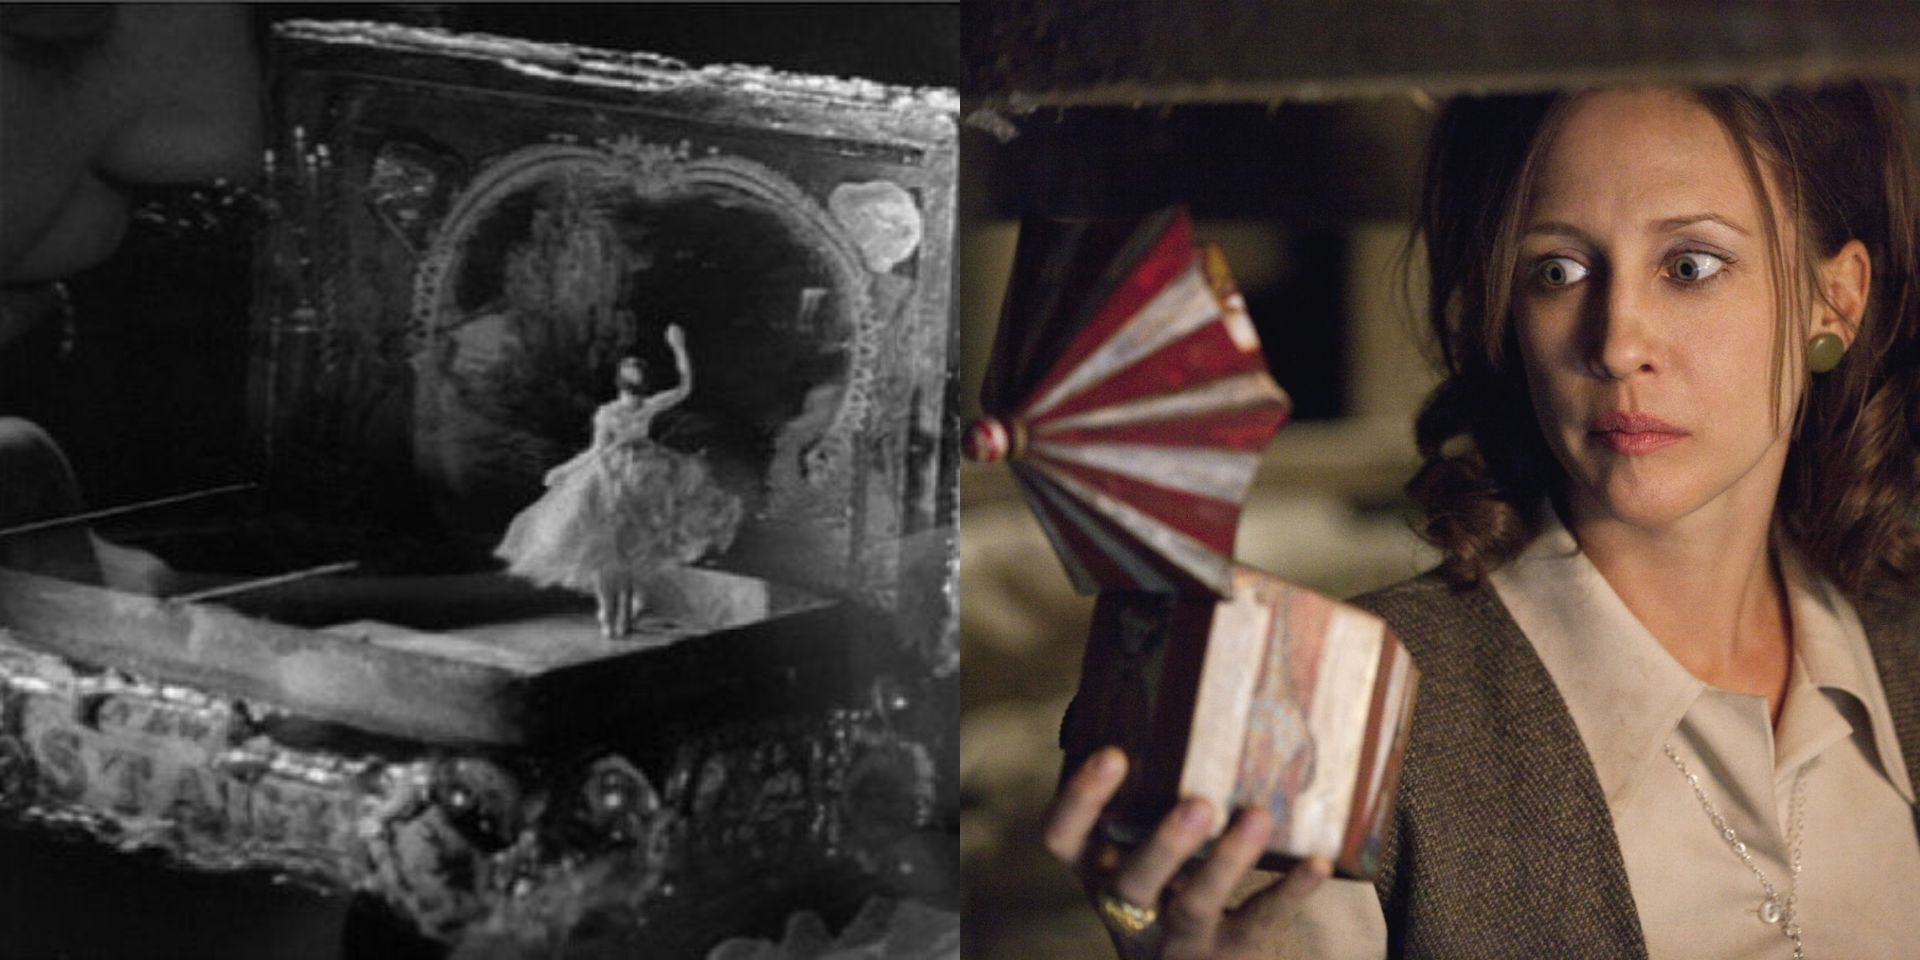 Music box with ballerina in The Innocents and The Conjuring 